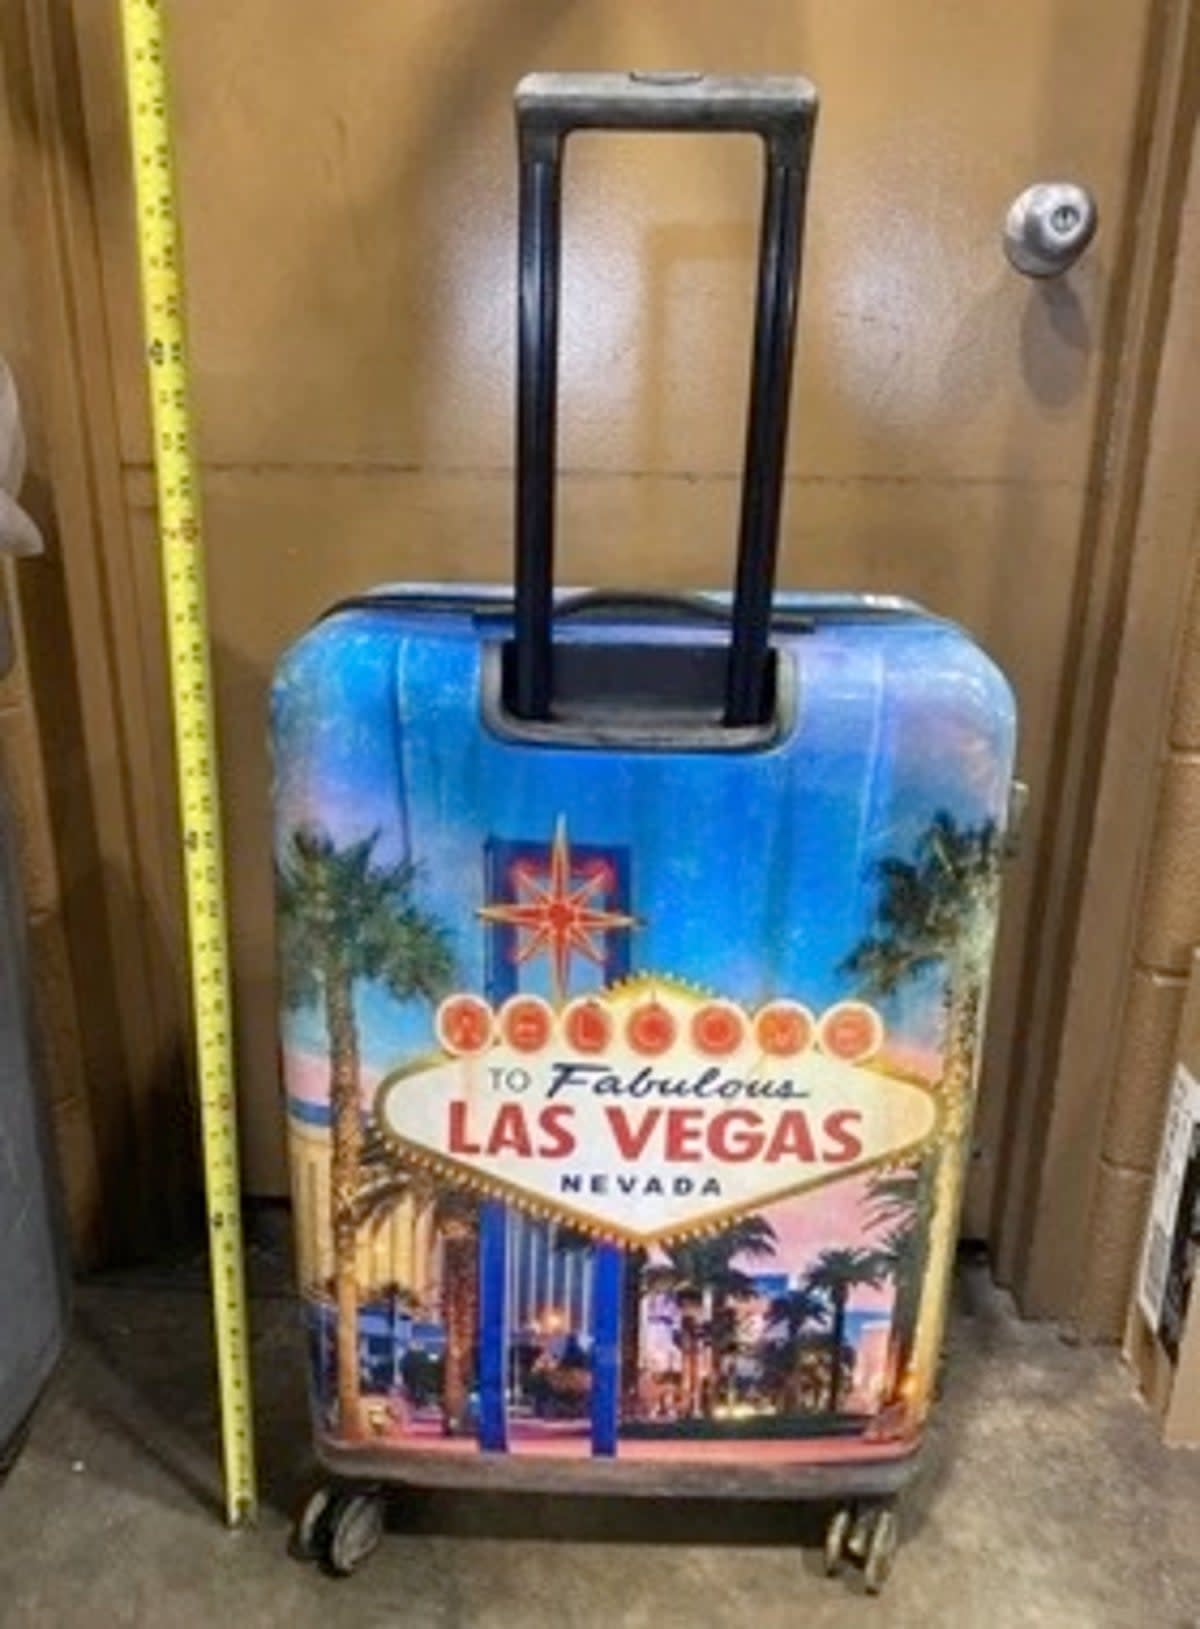 The boy’s body was stuffed inside this “Welcome to fabulous Las Vegas” suitcase (Indiana State Police)